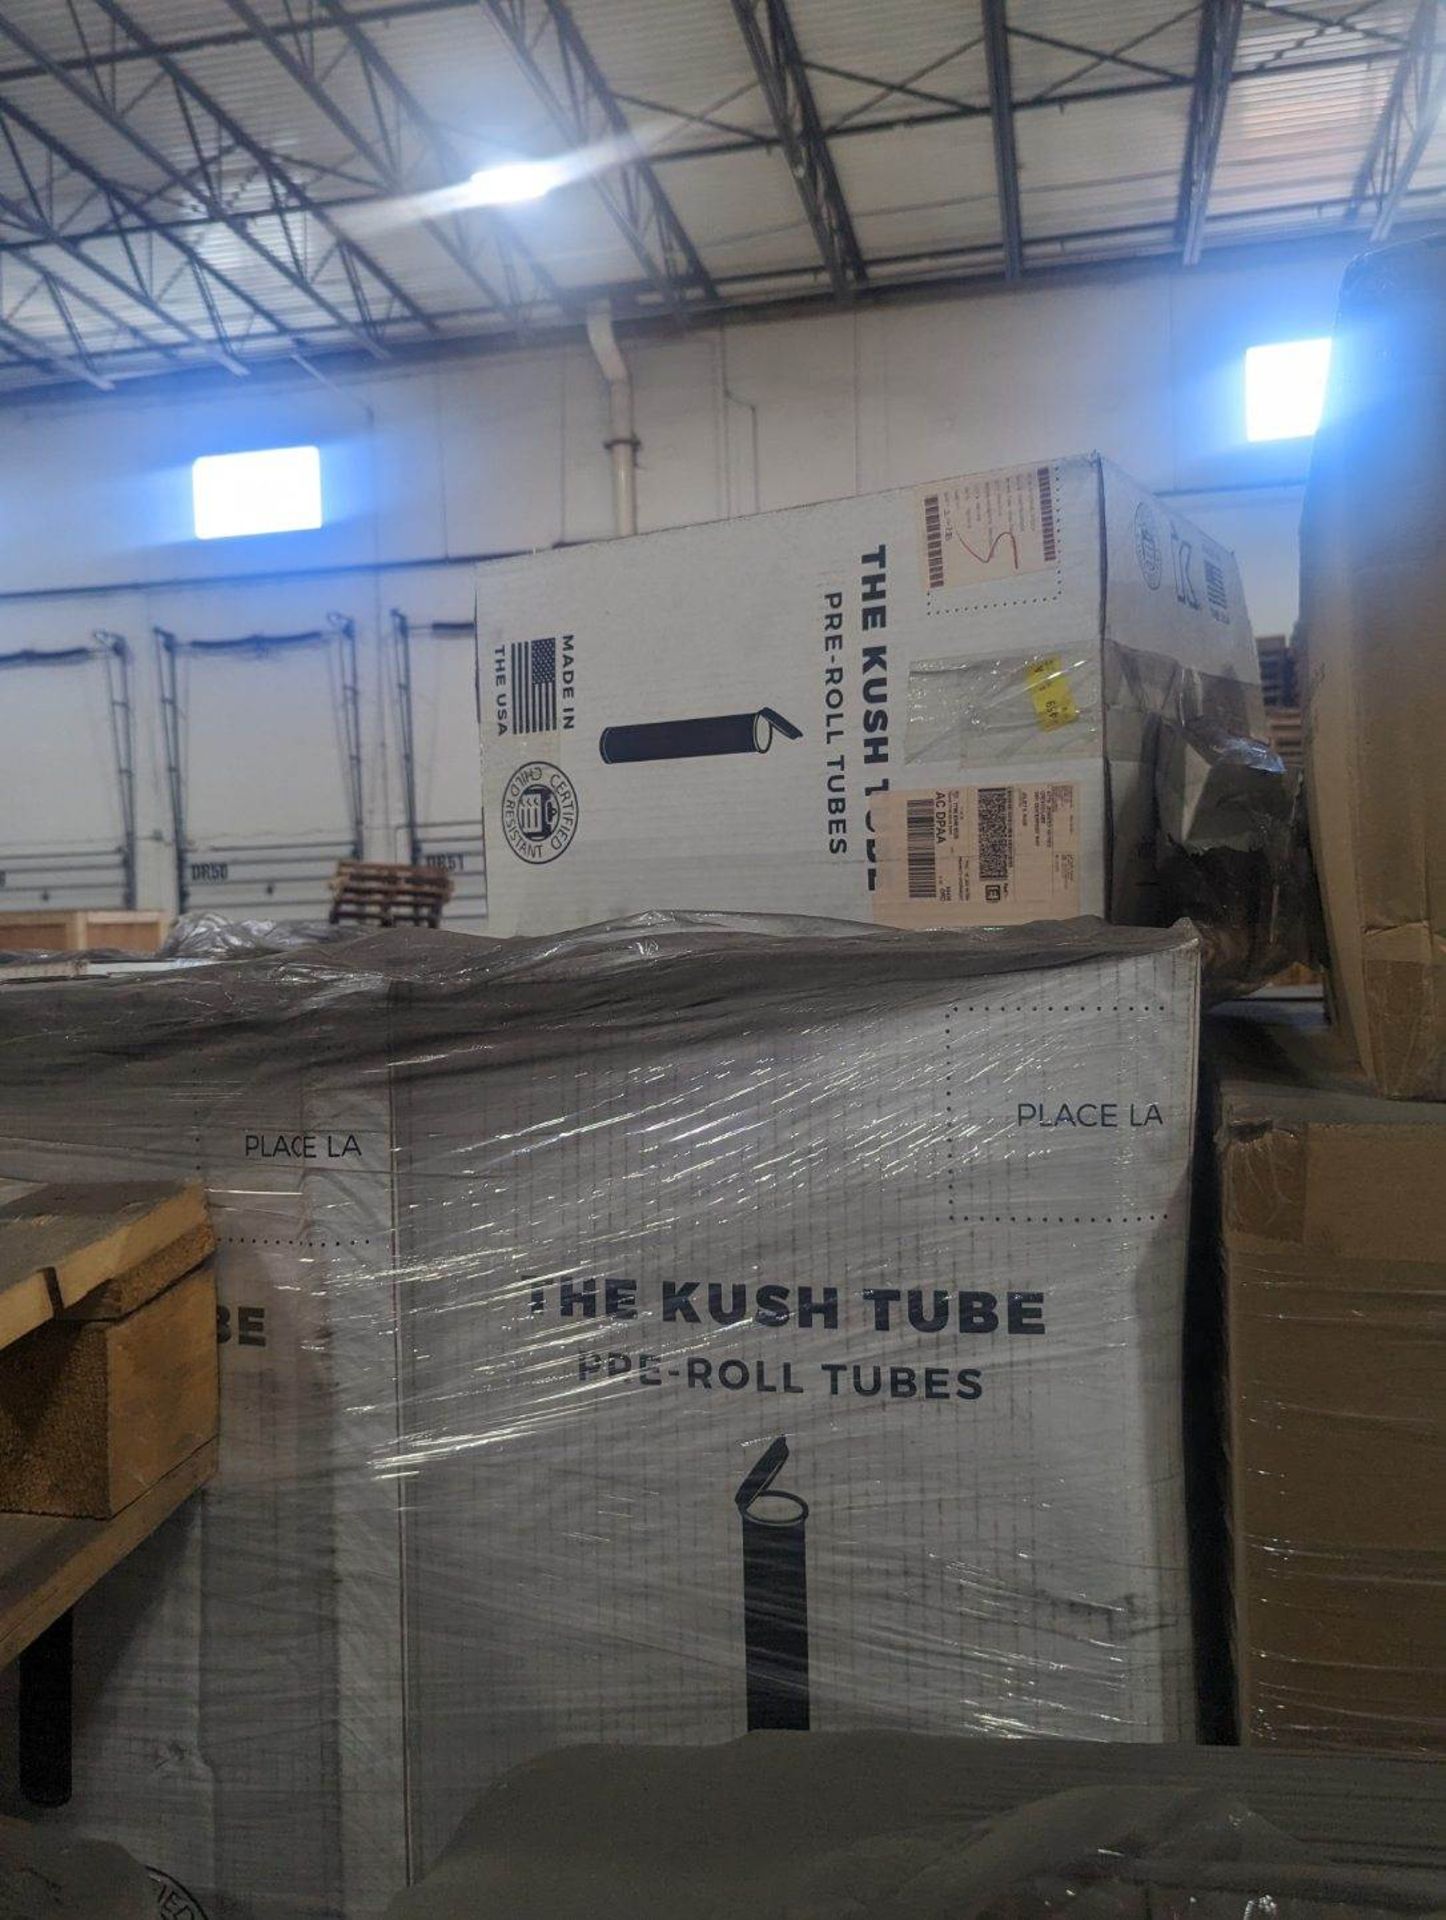 Lot of 26,000 Unused "The Kush Tube" 90 mm Snap Cap Joint Tubes. SKU 100760-000000. Color: Clear - Image 4 of 5